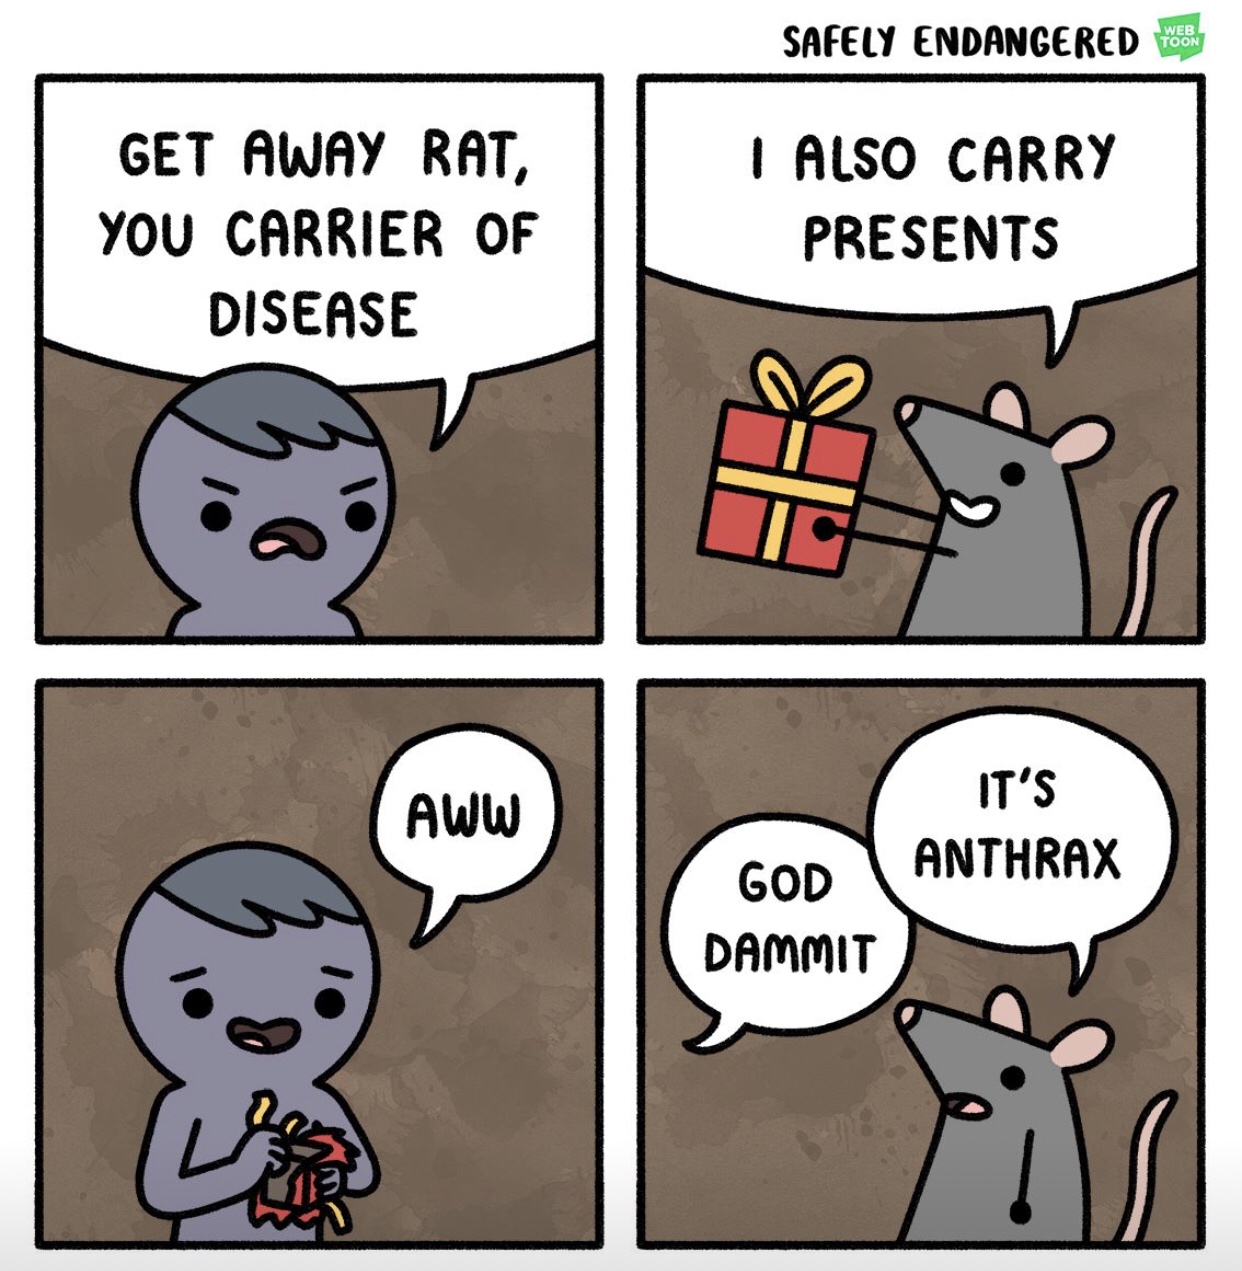 safely endangered rat - Safely Endangered Get Away Rat, You Carrier Of Disease I Also Carry Presents Aww It'S Anthrax God Dammit